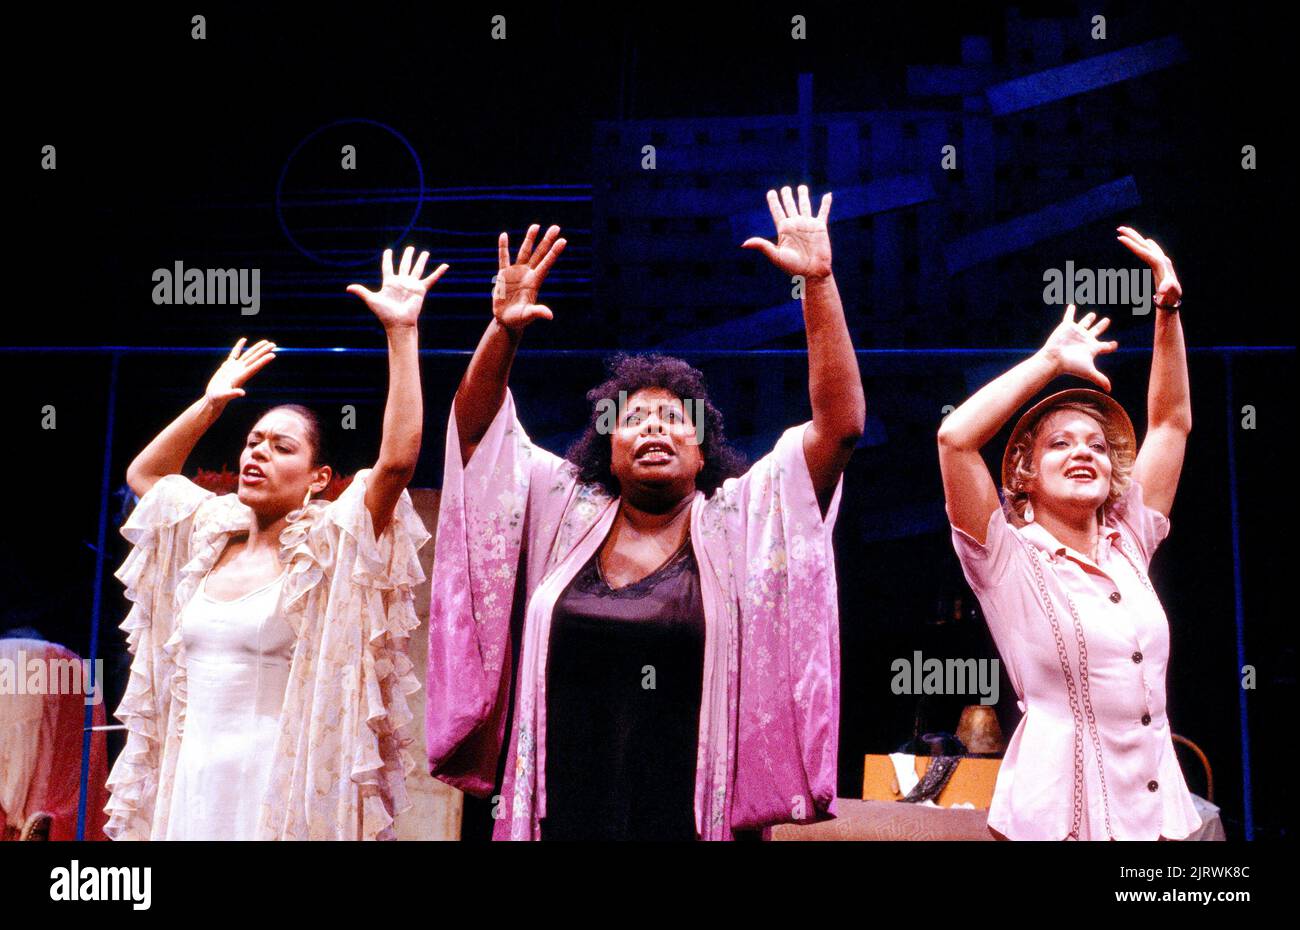 l-r: Debby Bishop, Carol Woods, Maria Friedman in BLUES IN THE NIGHT at the Donmar Warehouse, London WC2  12/06/1987  conceived & originally directed by Sheldon Epps  design: Michael Pavelka  lighting: Kevin Sleep  staging: Steve Whatley Stock Photo